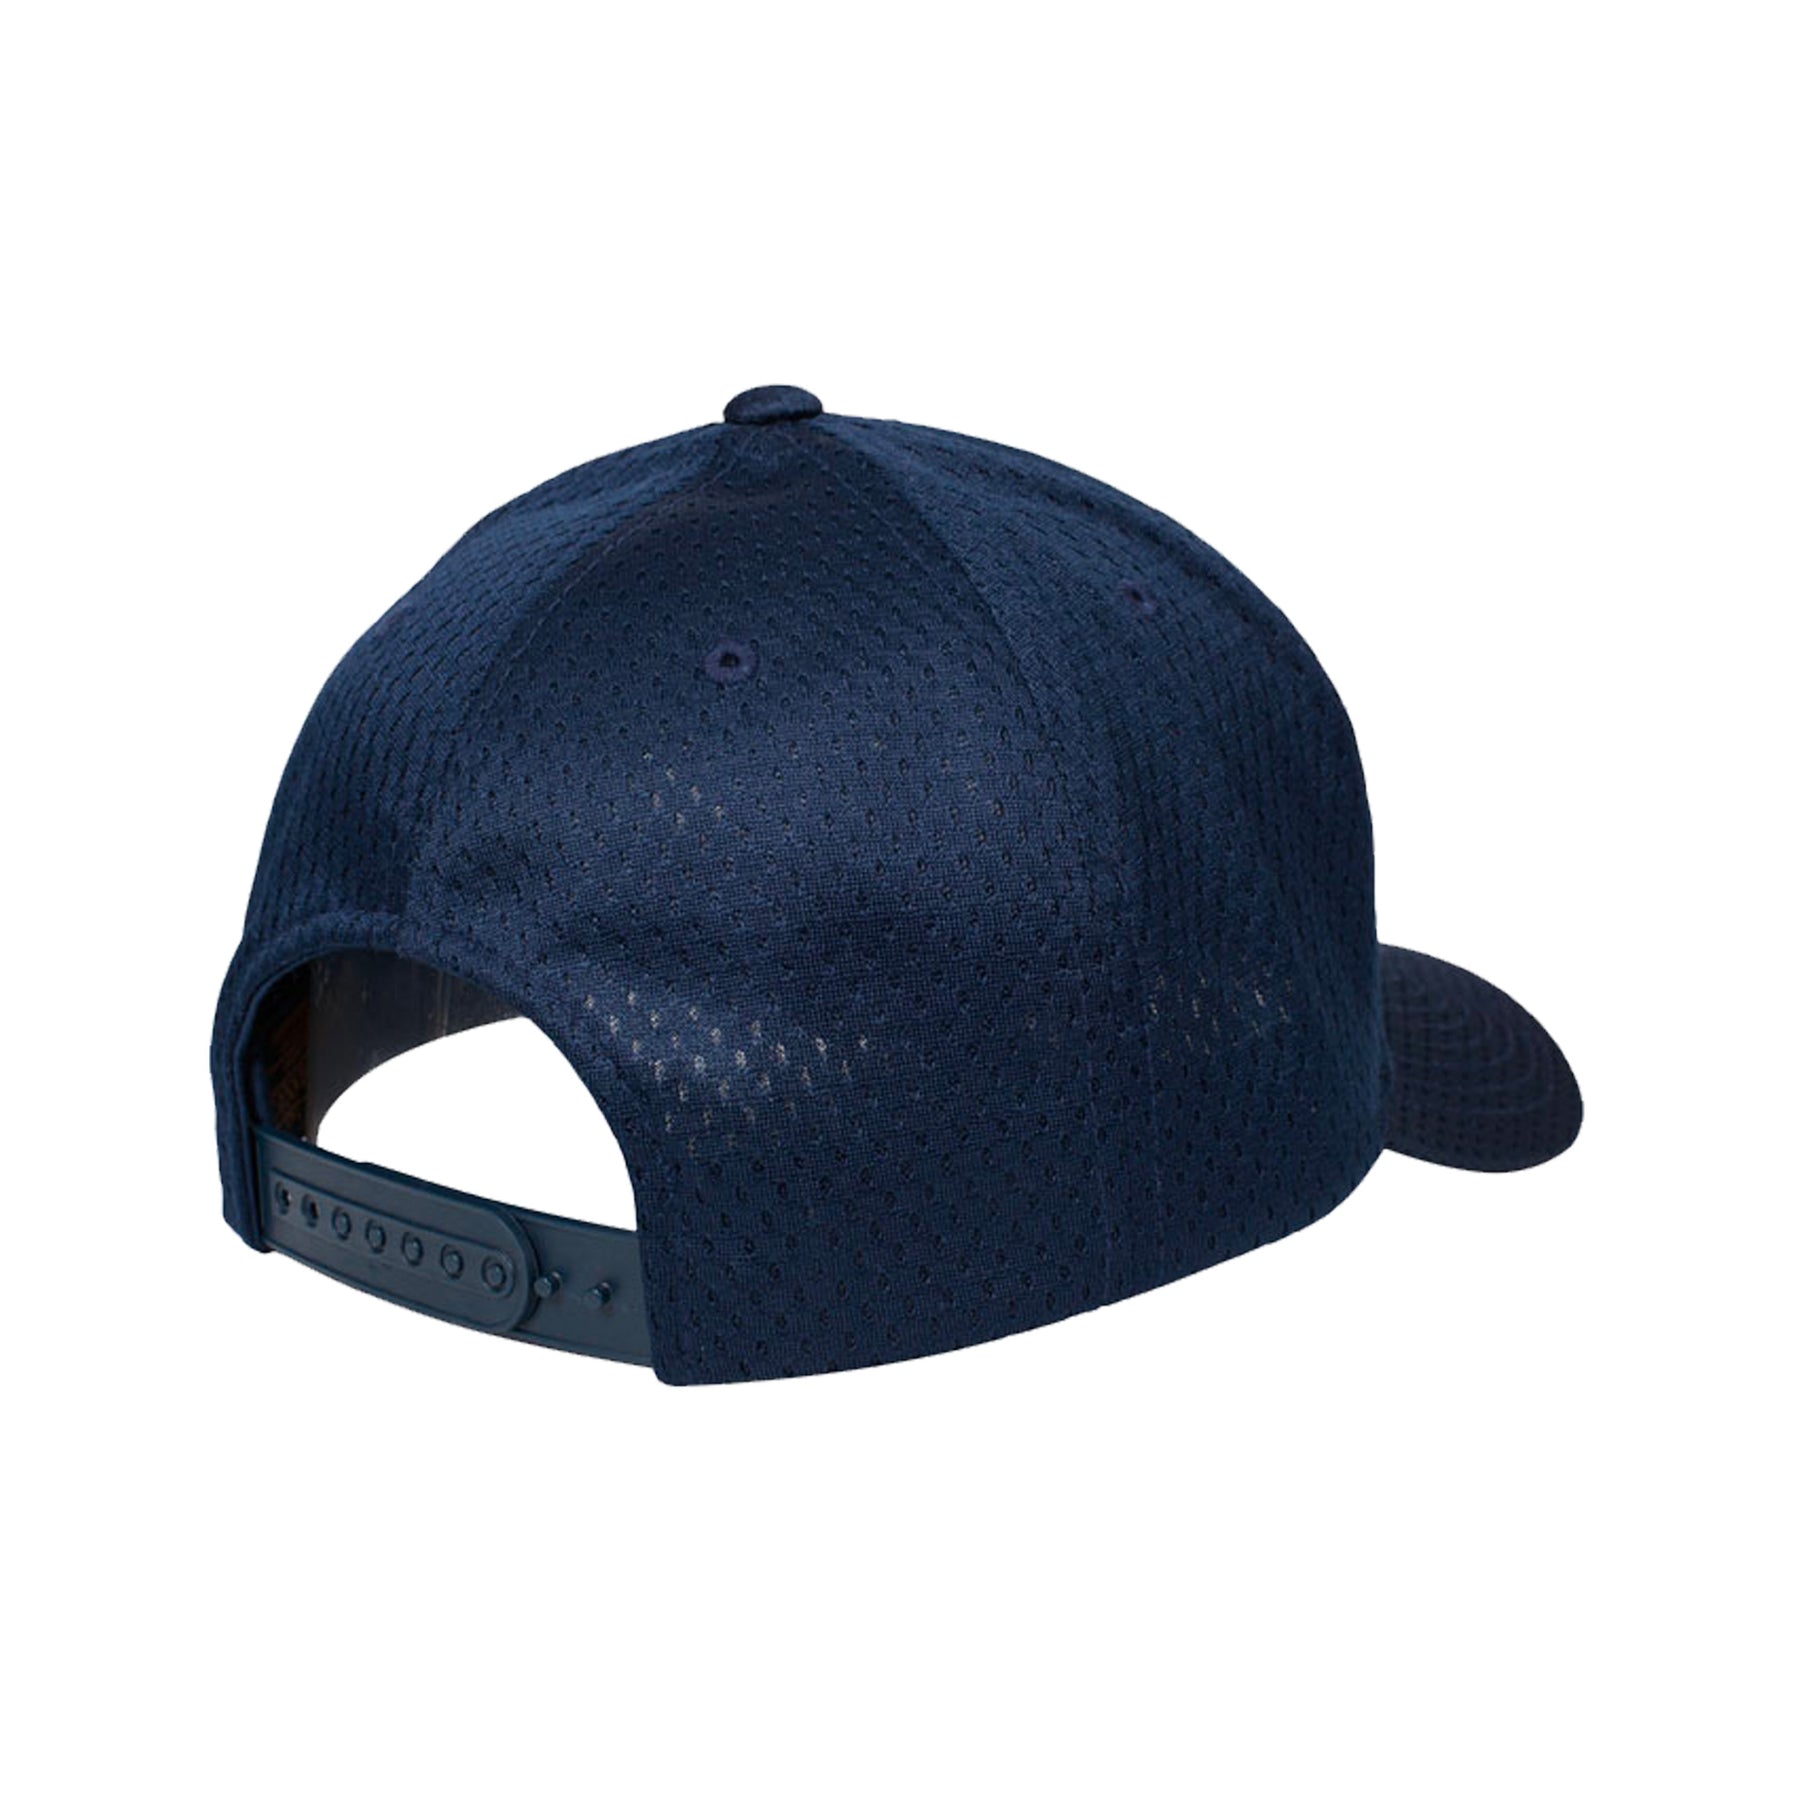 yupoong sports cap in navy